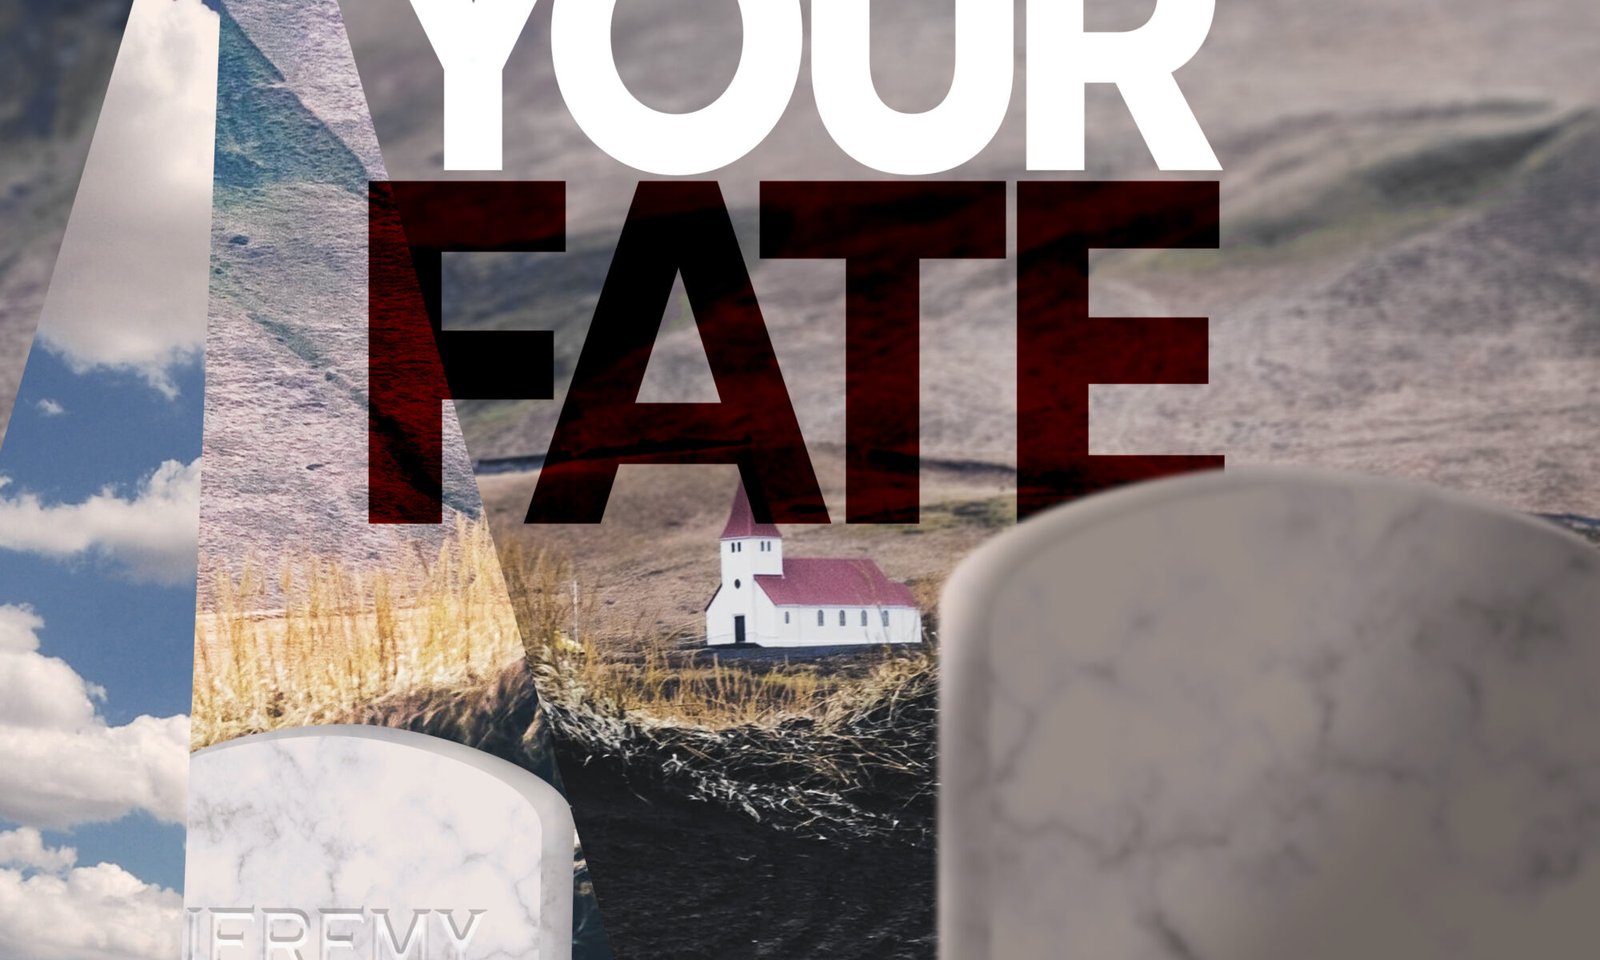 A tombstone with Jeremy's name is reflected in a Pyramidion. The episode title is displayed "Choose Your Fate."